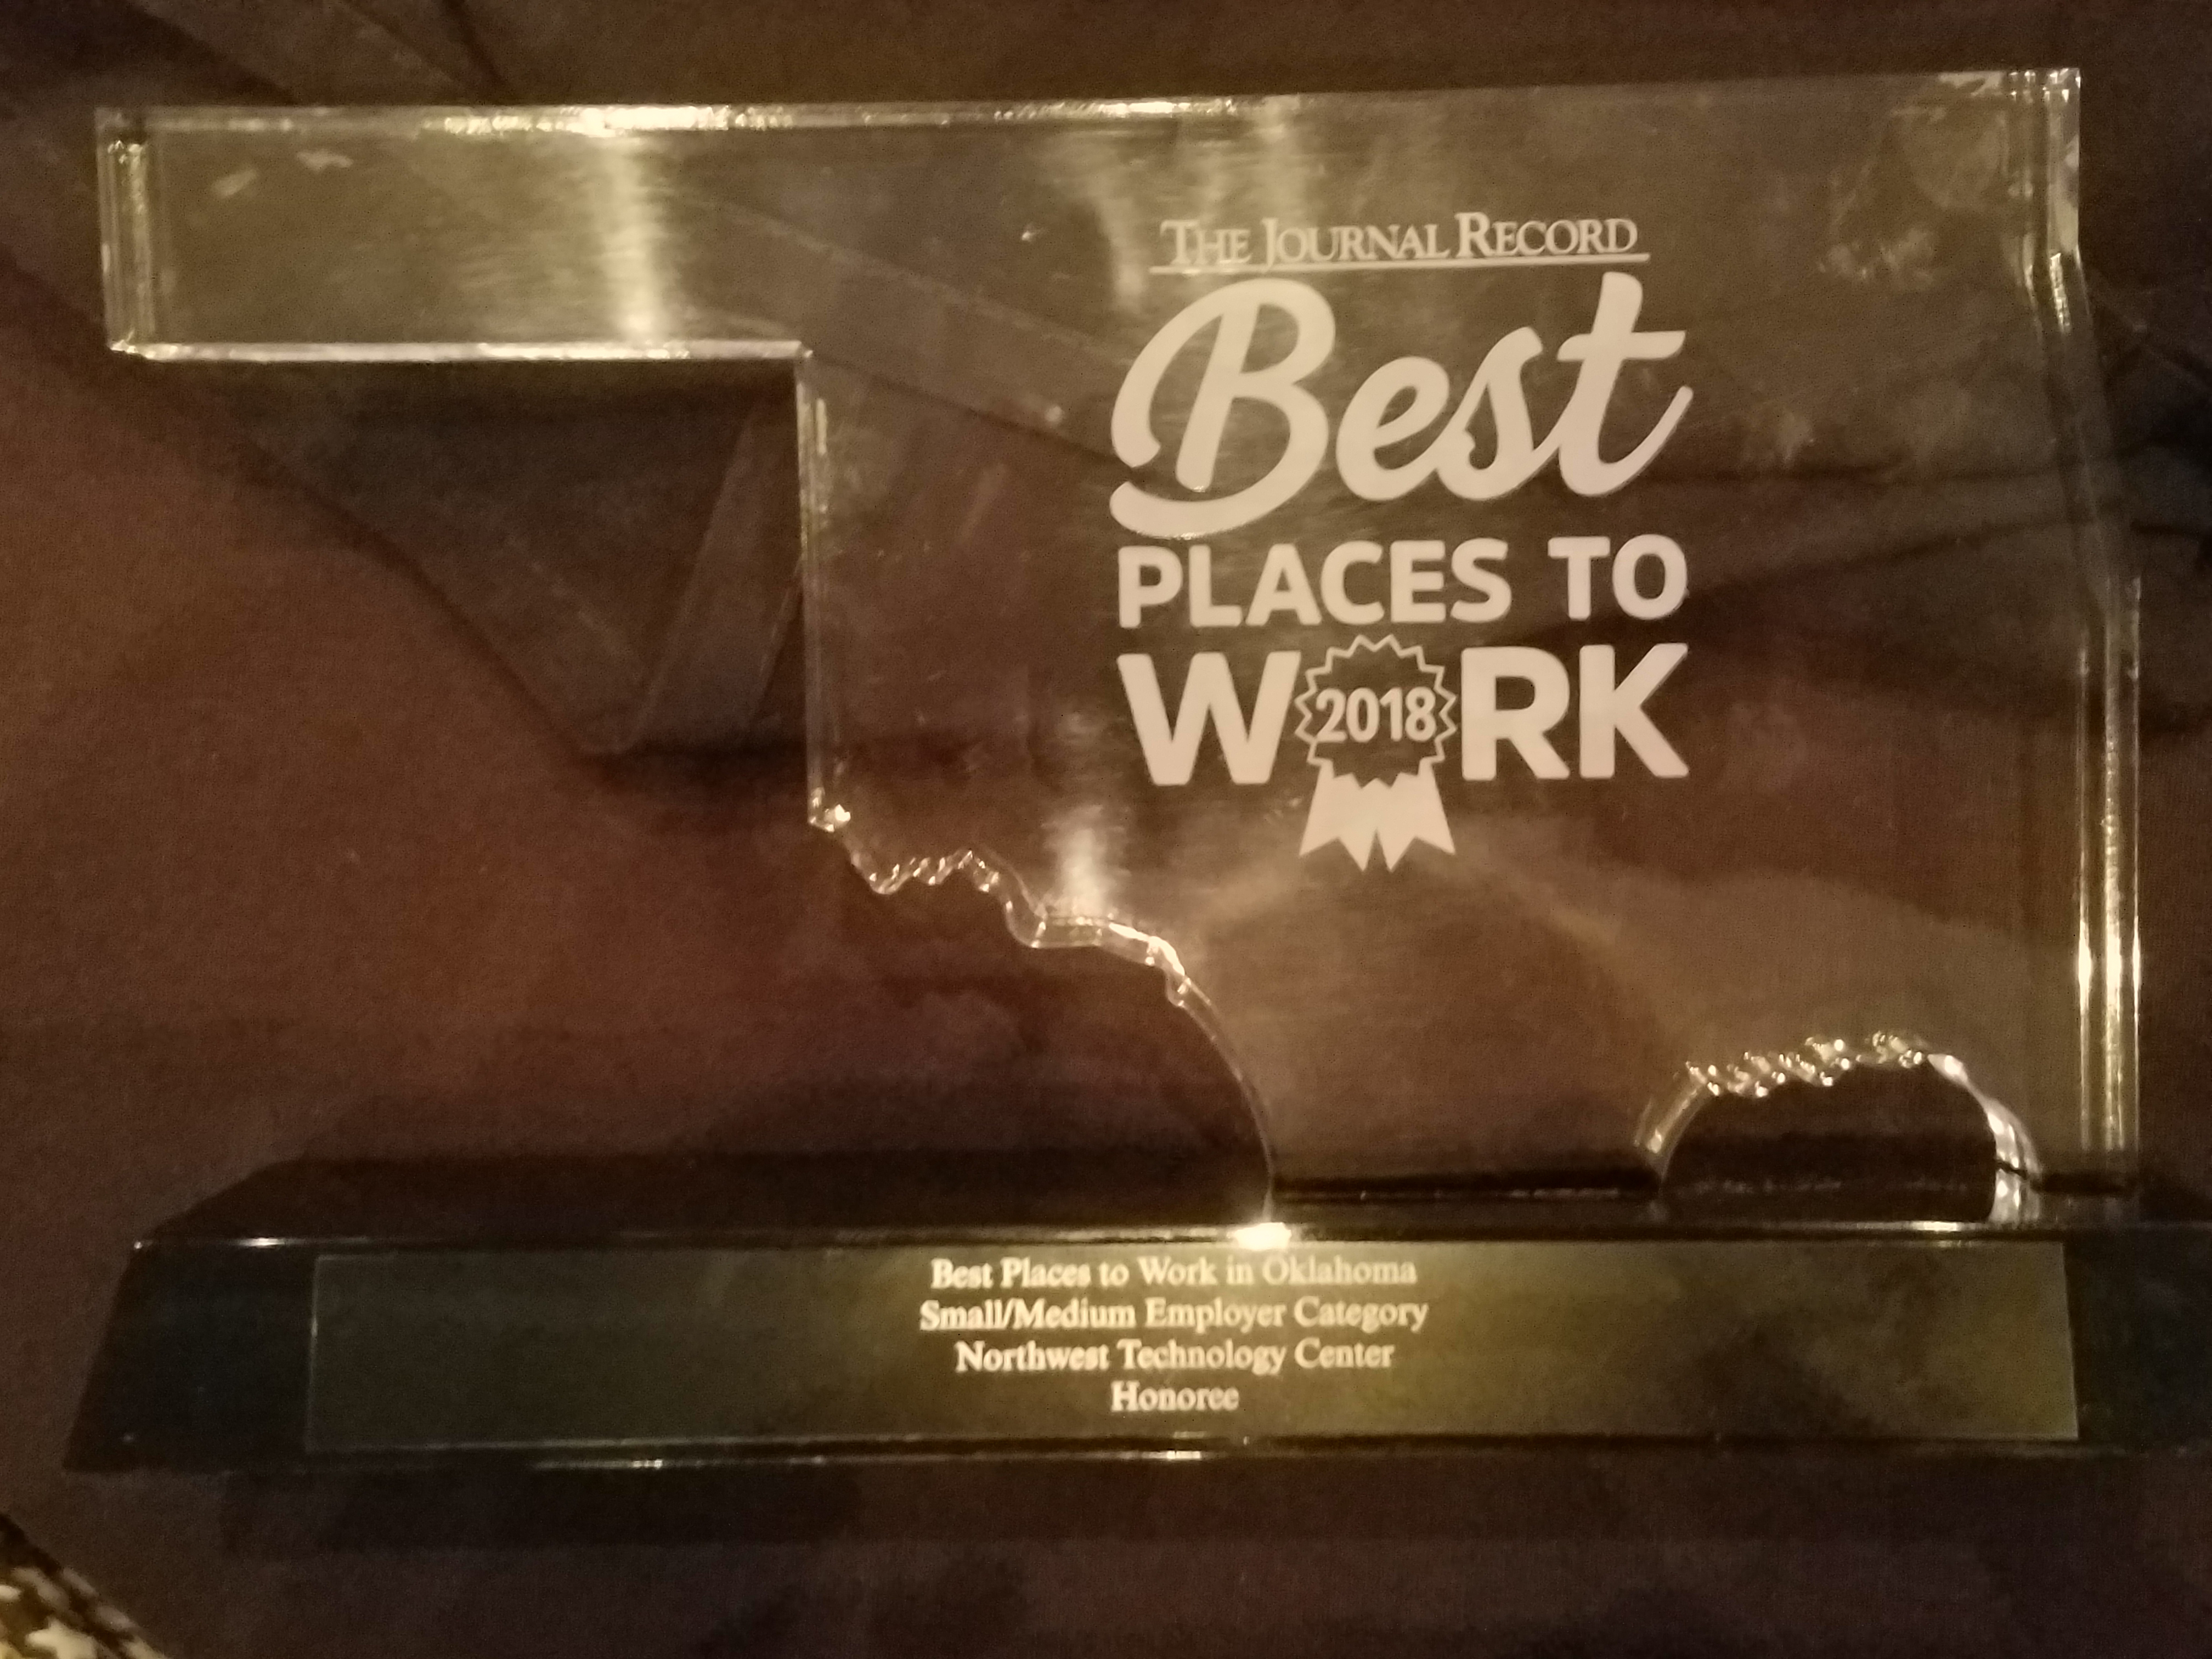 NWTC Recognized With Best Places To Work Award Northwest Technology